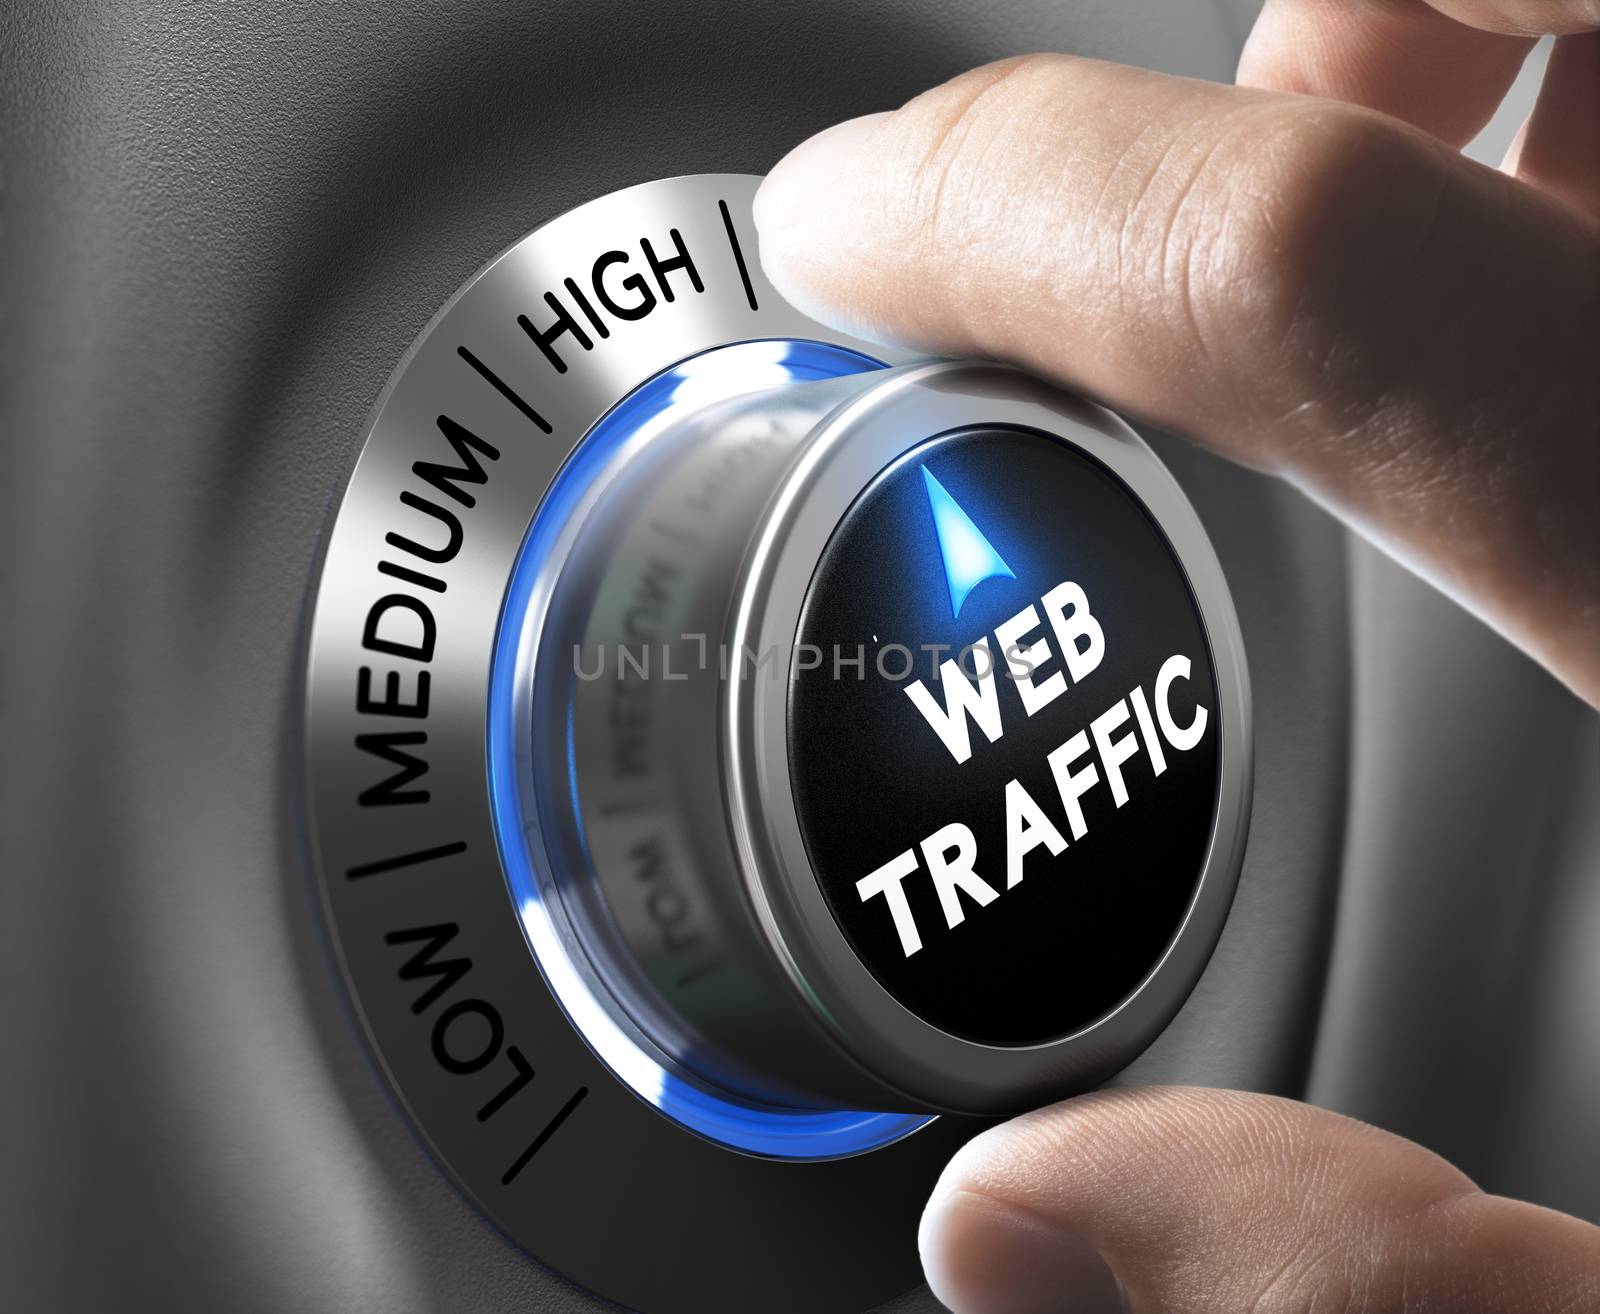 Website Traffic by Olivier-Le-Moal